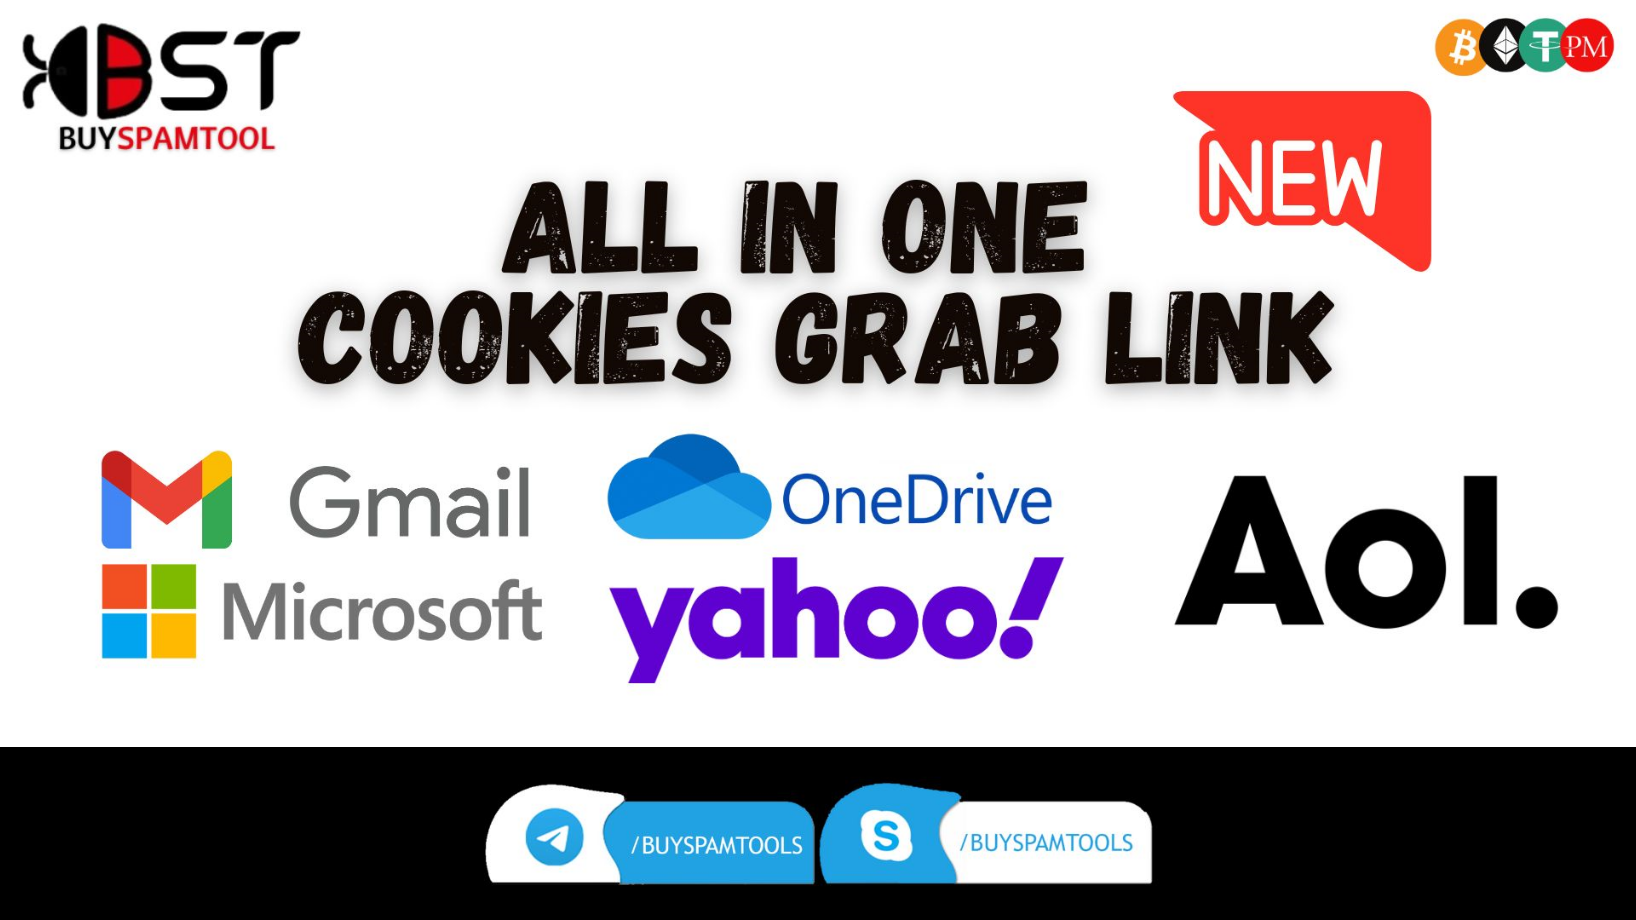 All in One Cookies Grab Page/Link (OneDrive, AOL, GMAIL, YAHOO, OFFICE365)